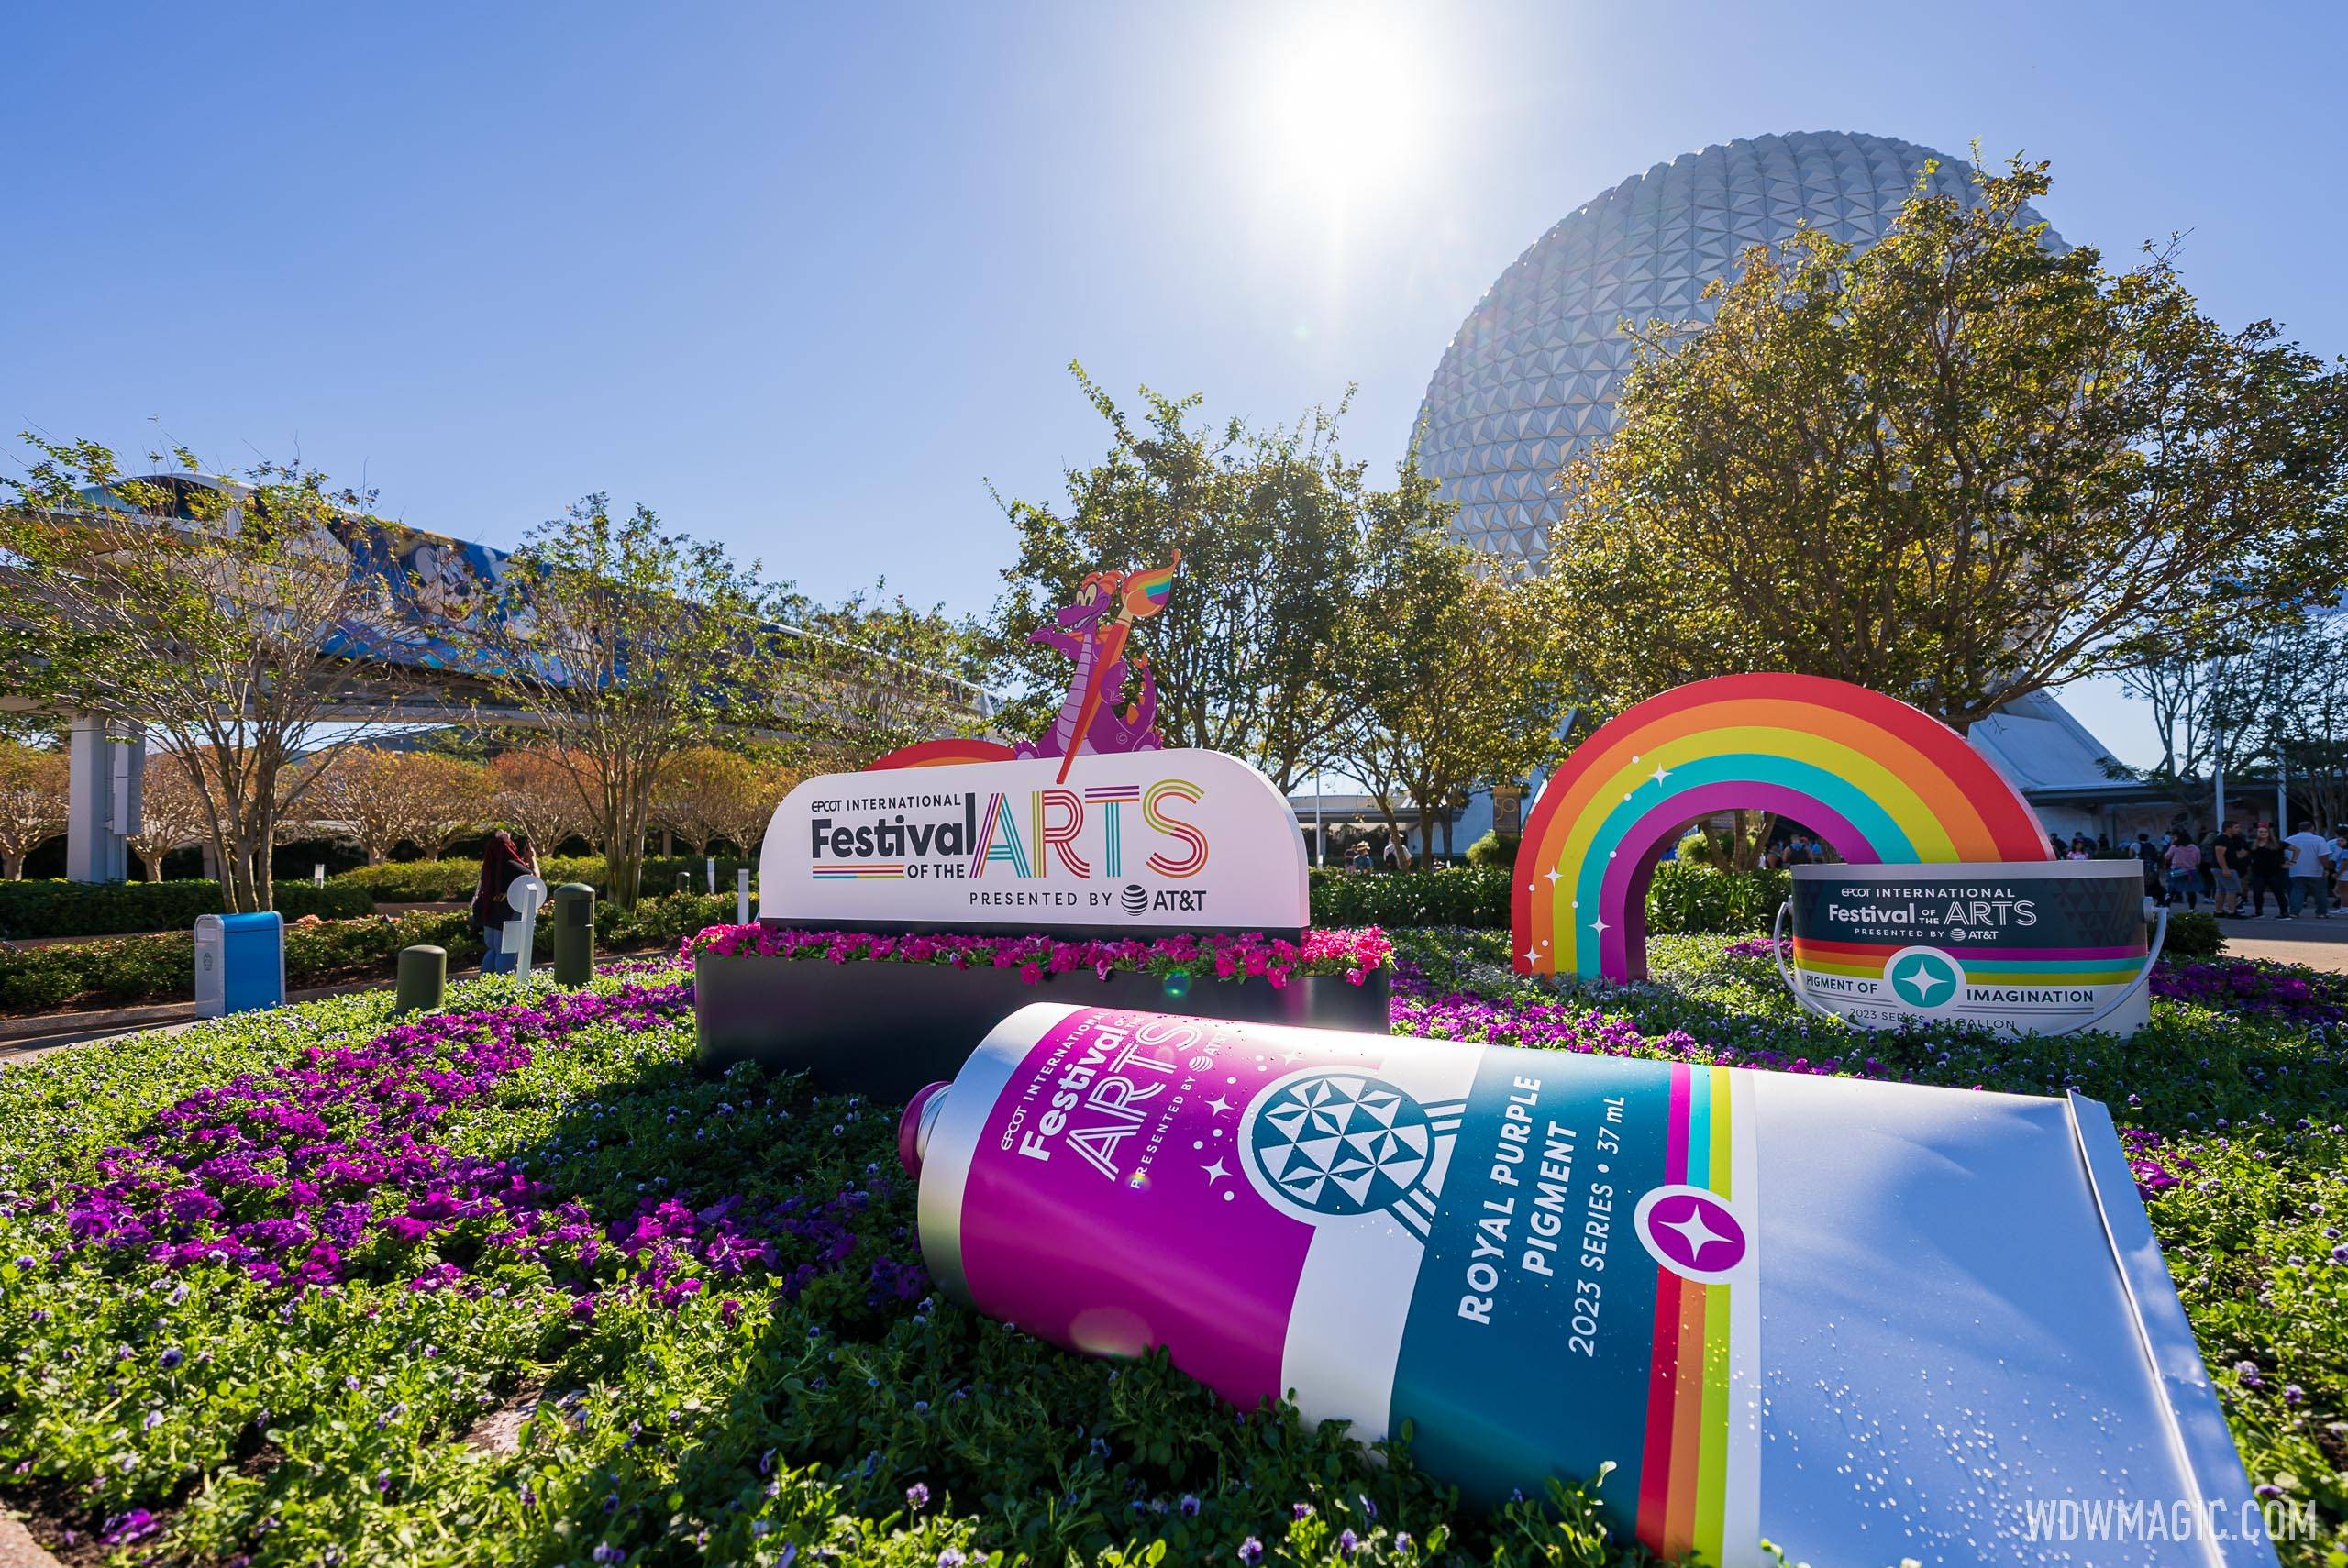 Epcot's Festival of the Arts' Paint-By-Number Murals Are Returning, But In  a New Location!